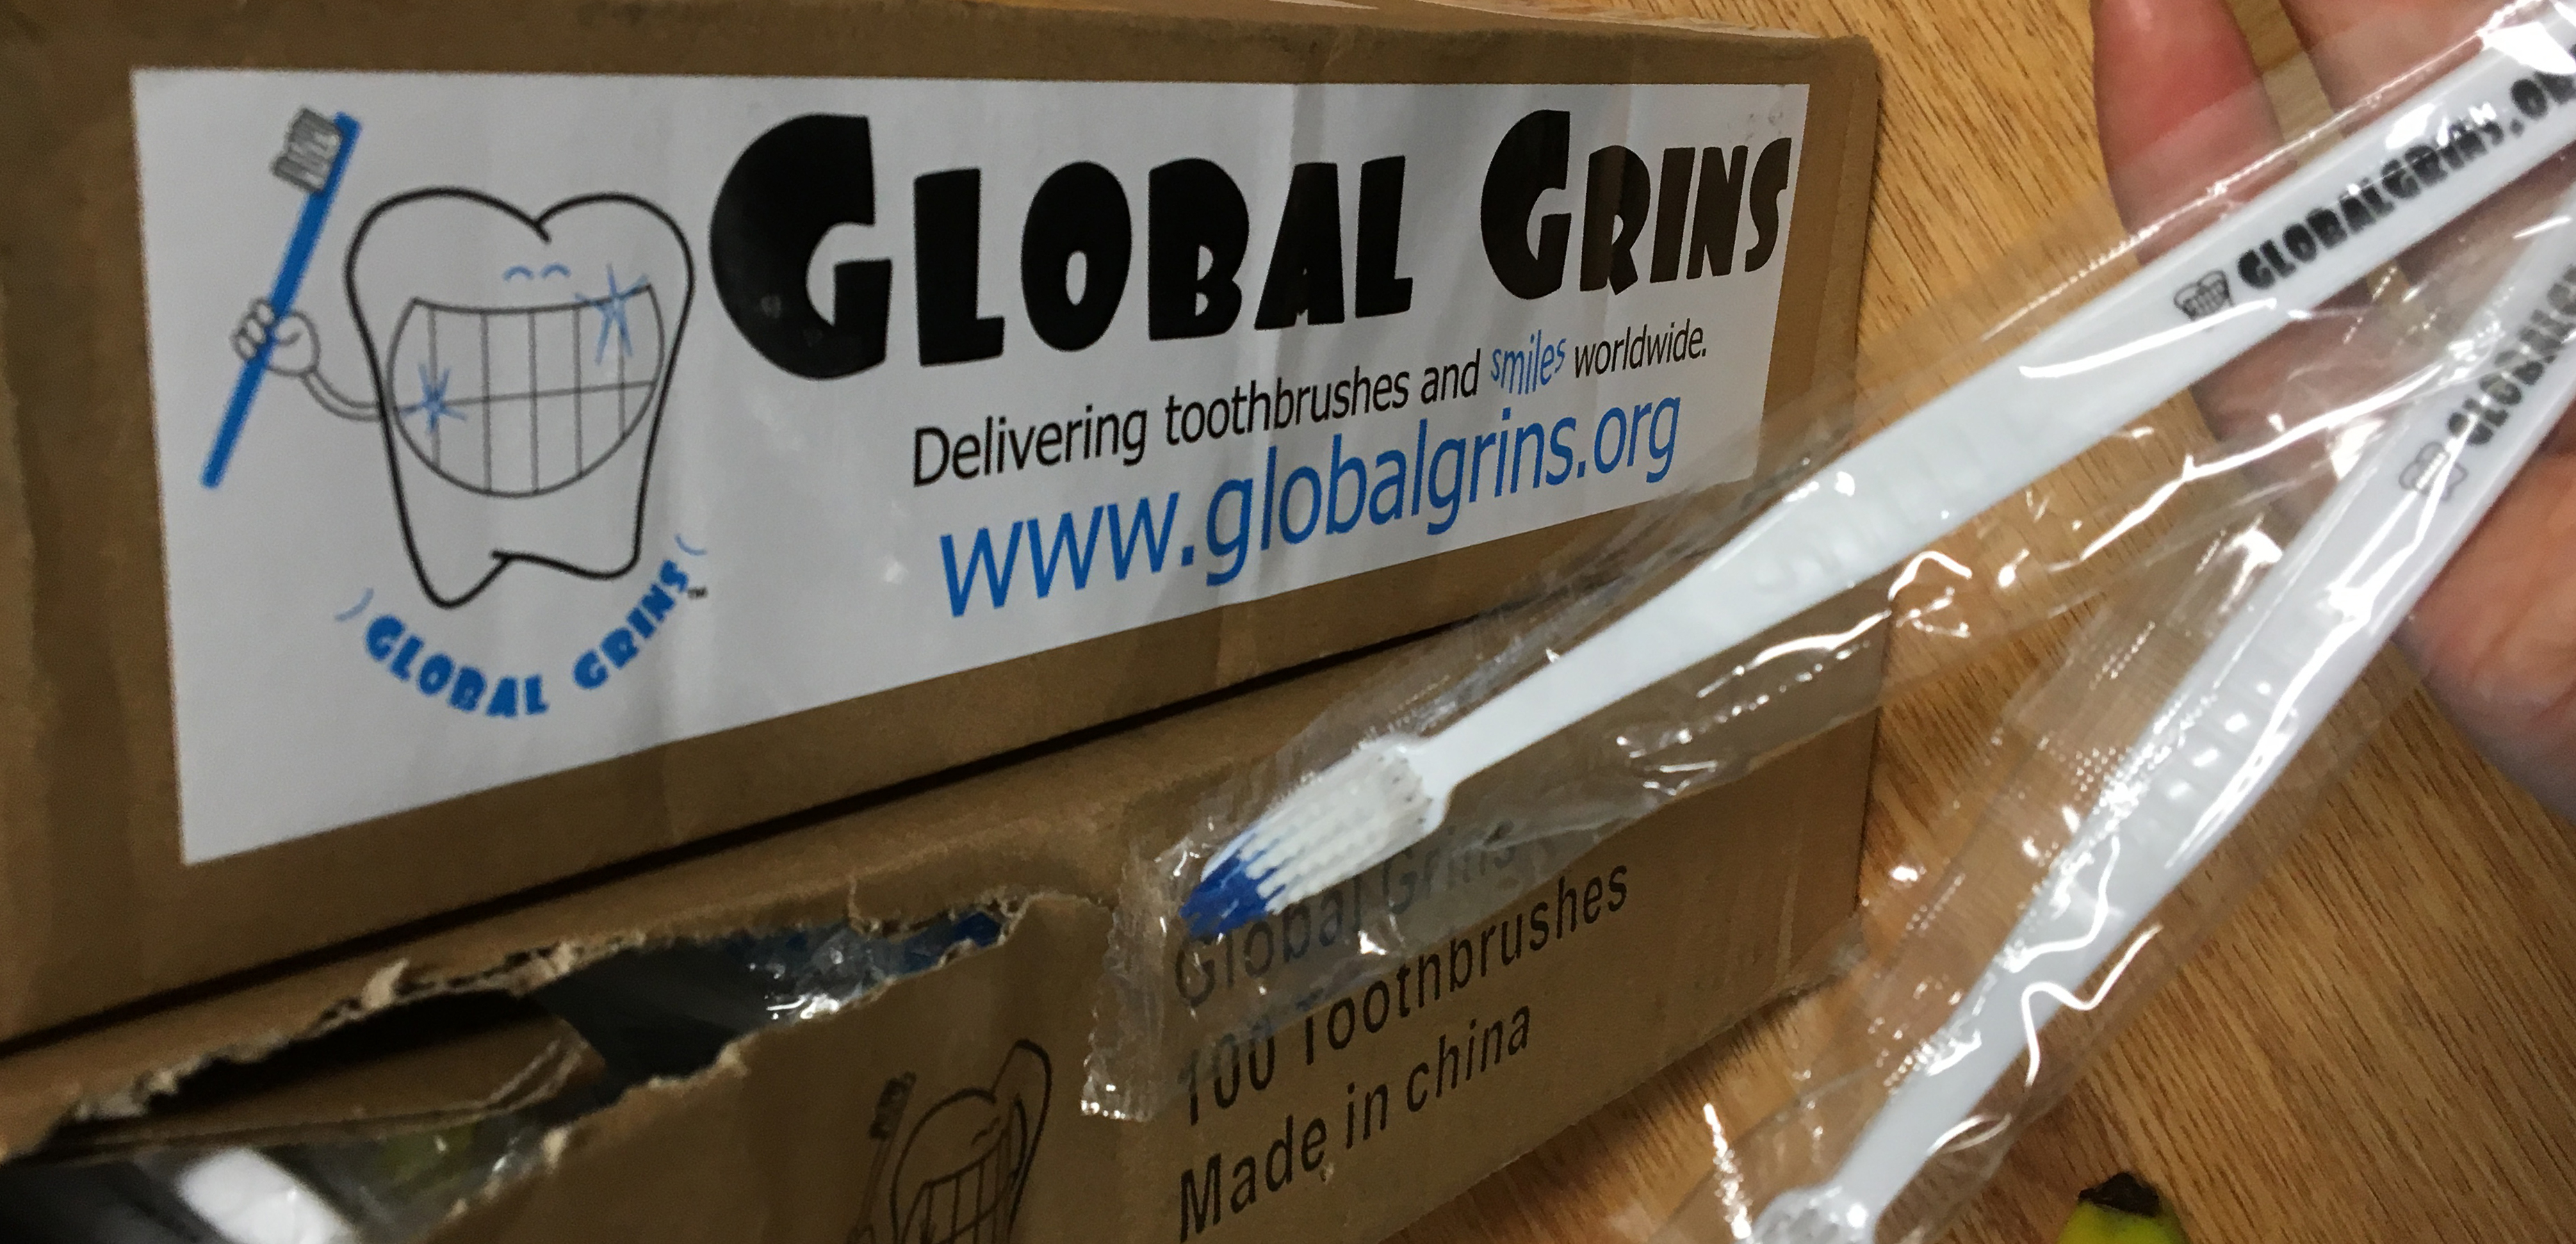 globalgrins.org's donation of 200 toothbrushes, going to Peru!